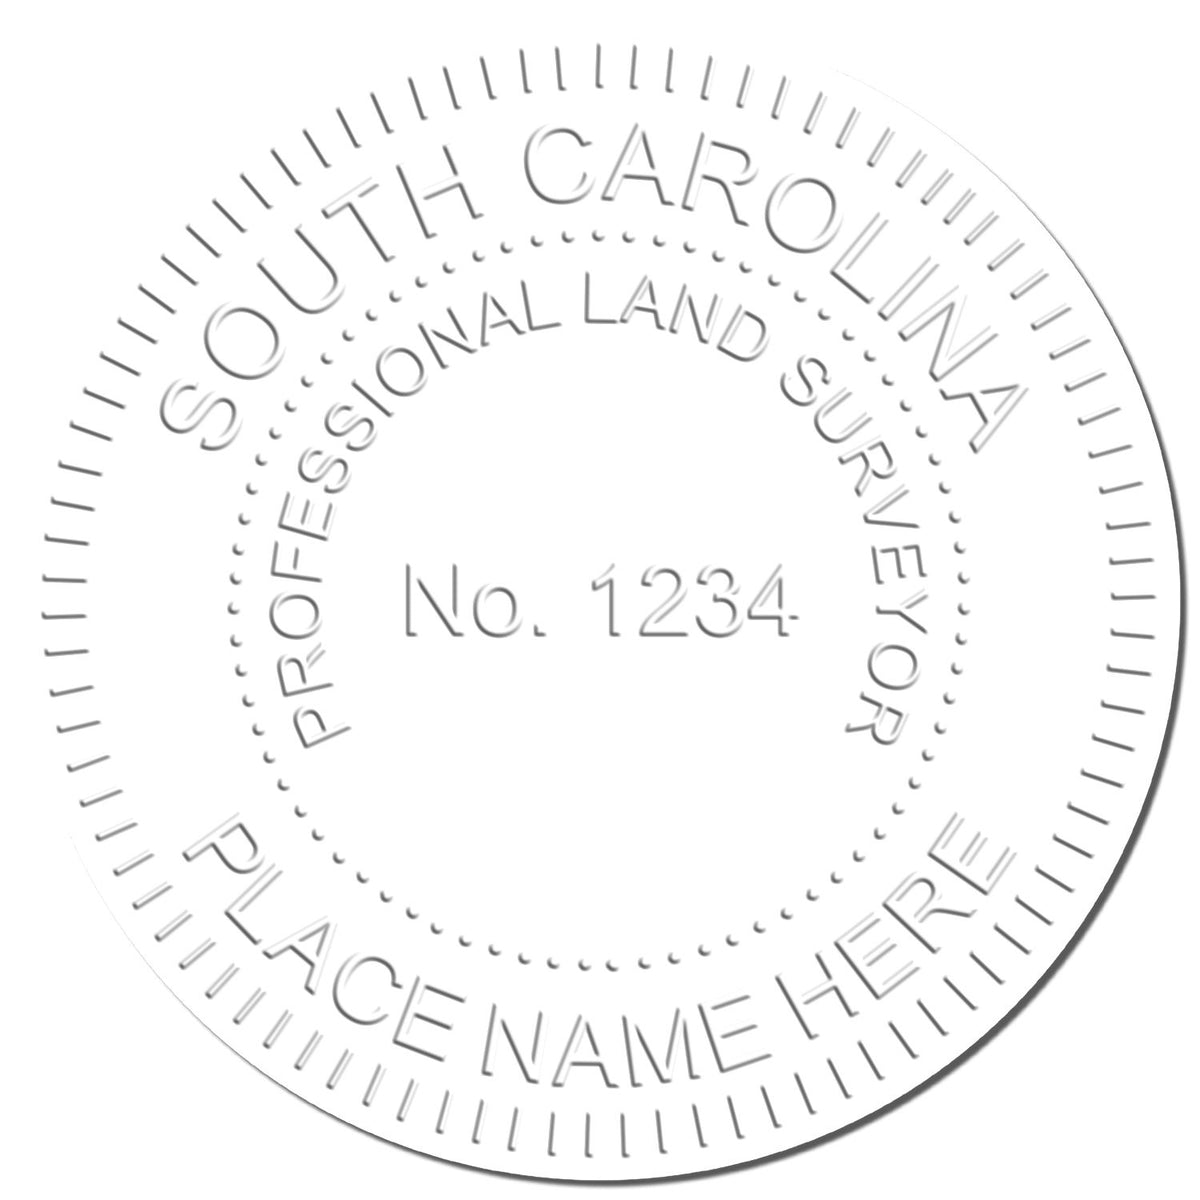 This paper is stamped with a sample imprint of the Gift South Carolina Land Surveyor Seal, signifying its quality and reliability.